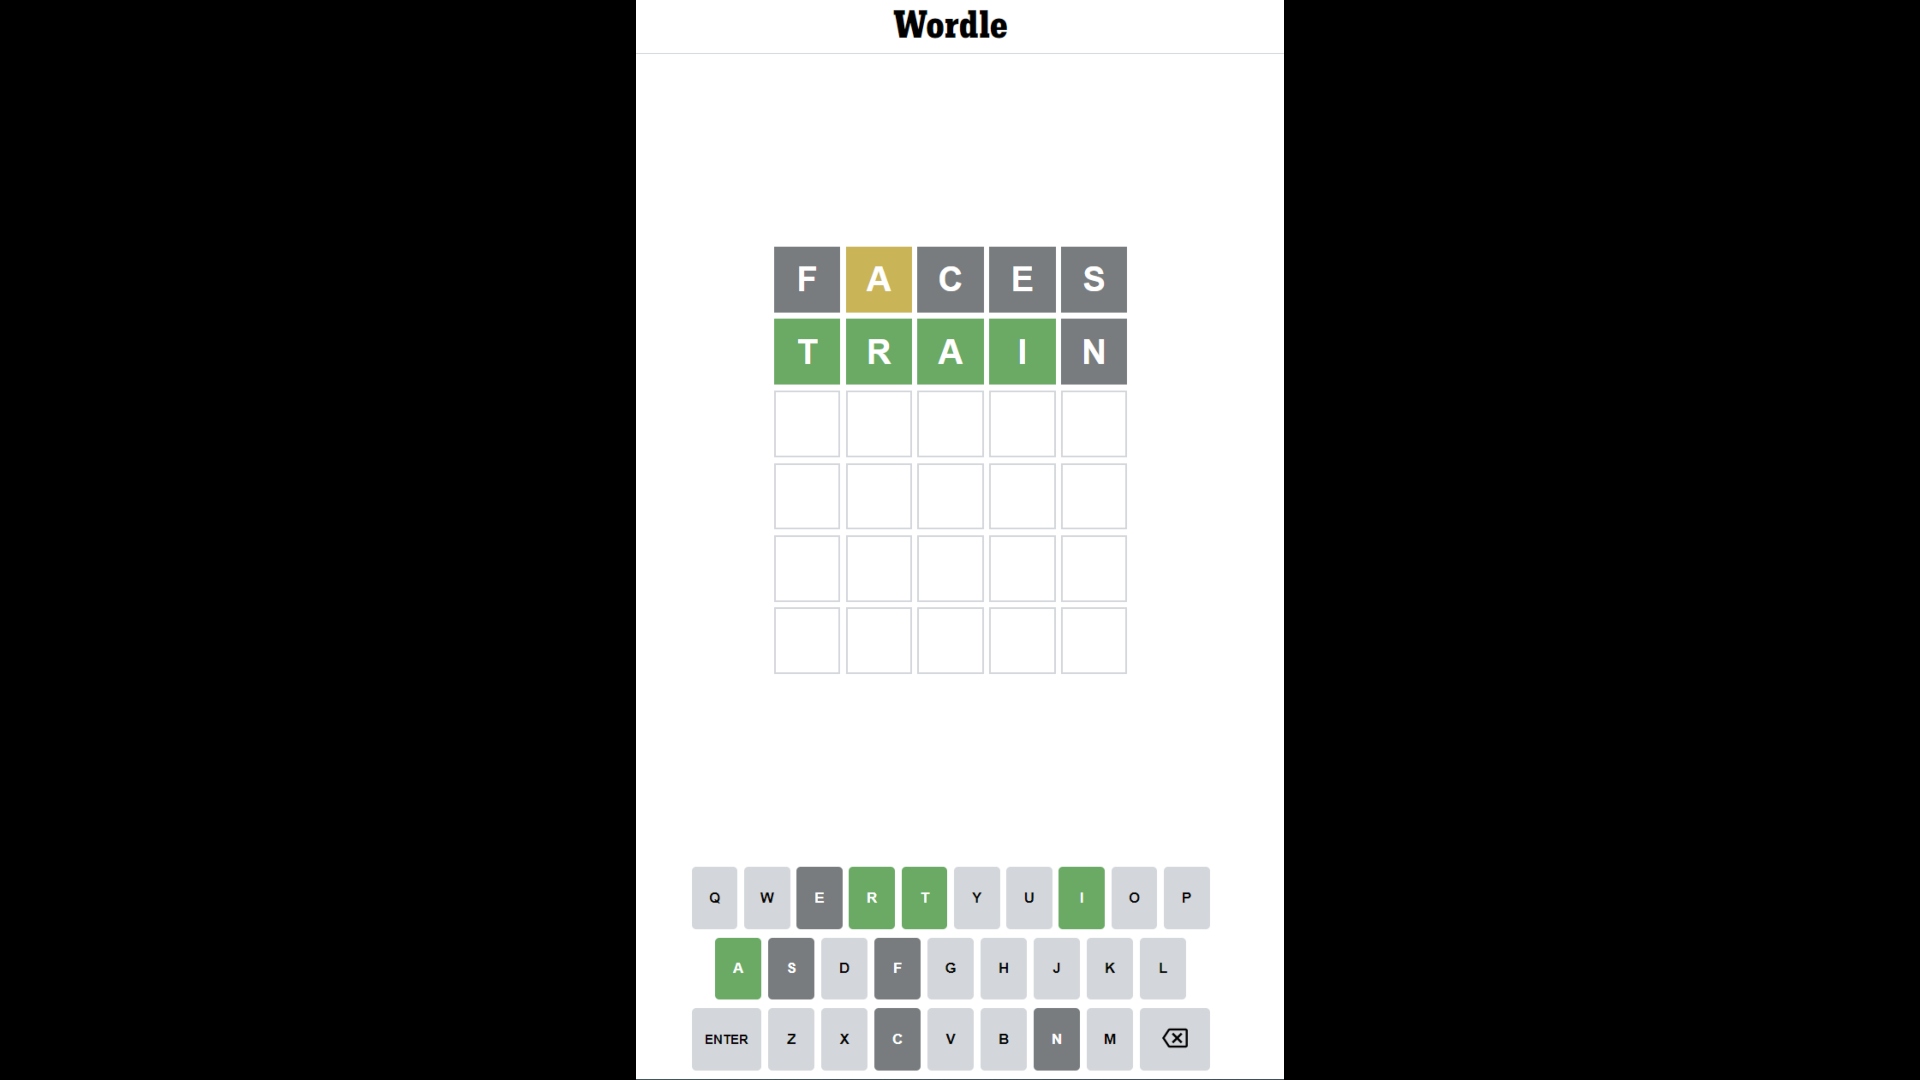 Best word games - Wordle. A screenshot shows a Wordle game in process, with the player having guessed the word 